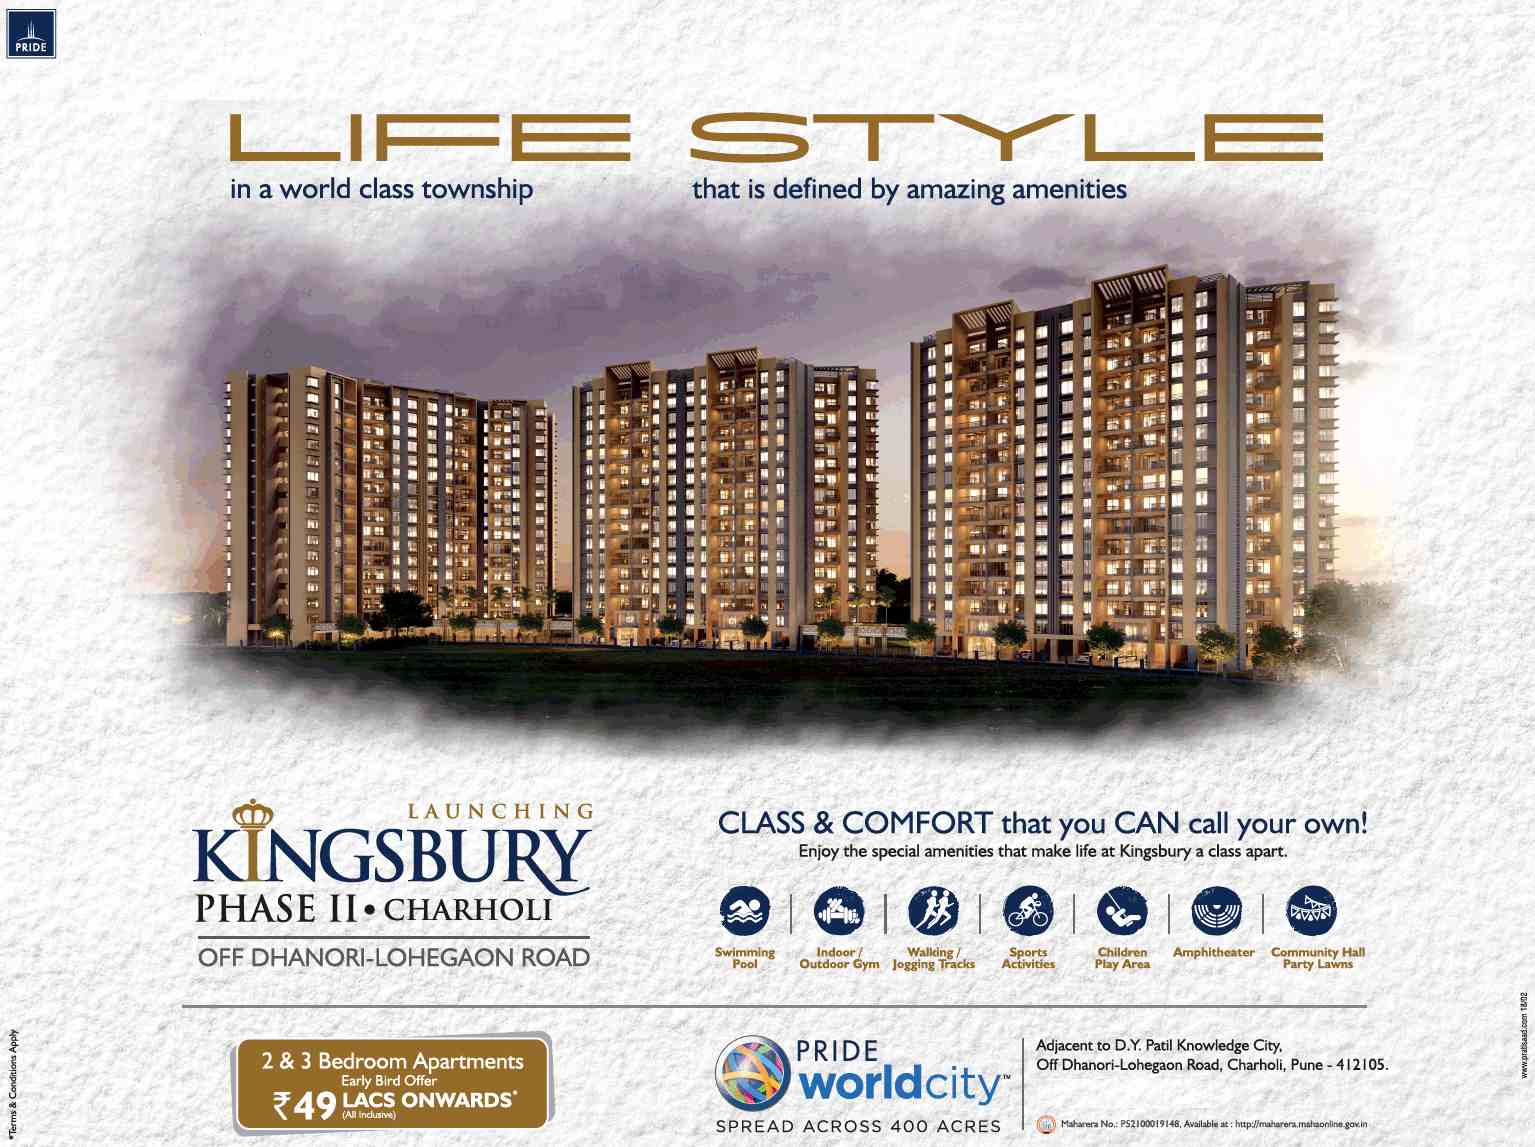 Book 2 & 3 bed apartments @ Rs 49 Lacs onwards at Pride Kingsbury in Charholi, Pune